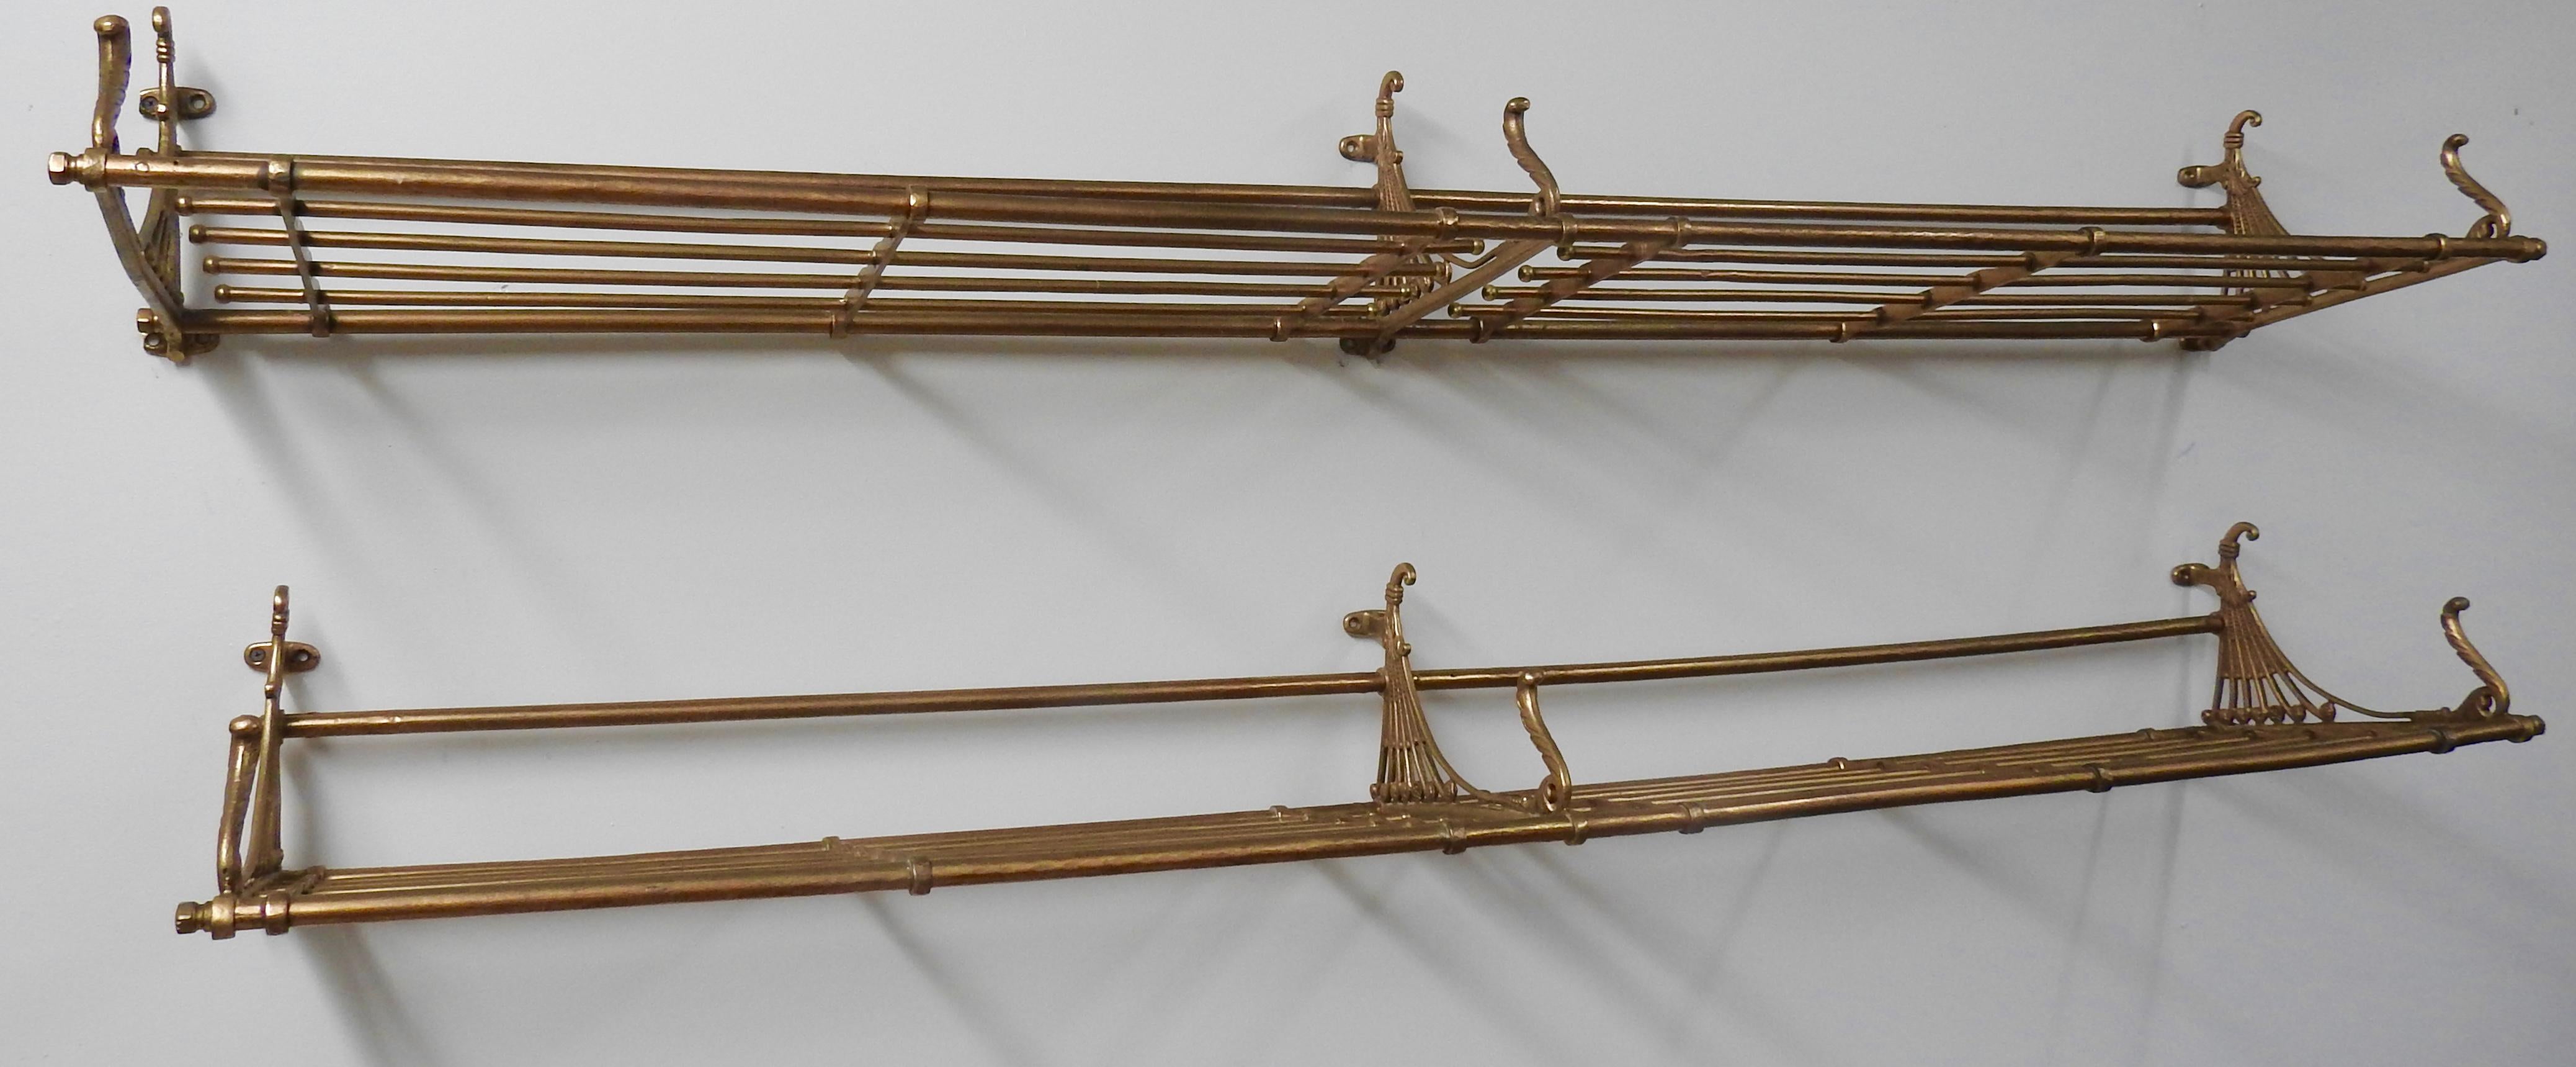 19th Century Train Car Luggage Rack For Sale at 1stDibs